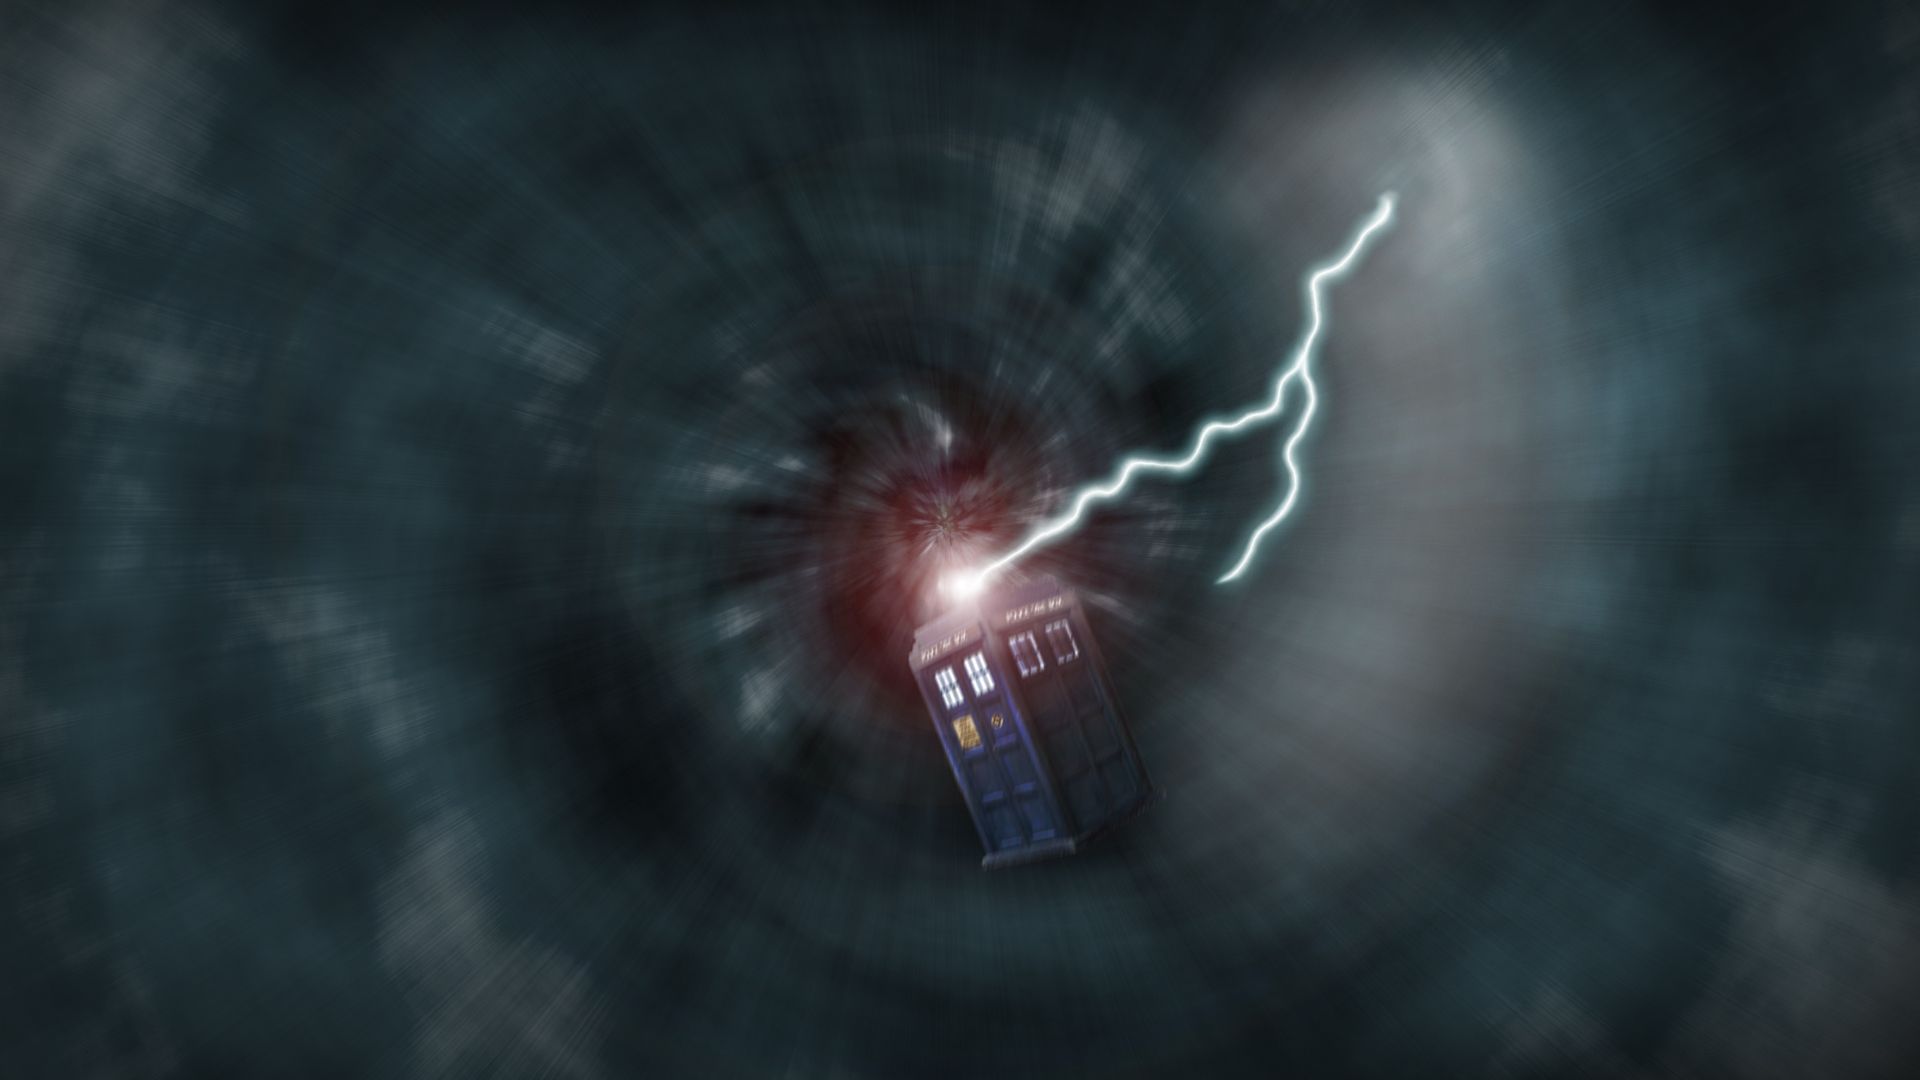 Doctor Who Wallpapers | Dr Who Wallpapers - HD A12